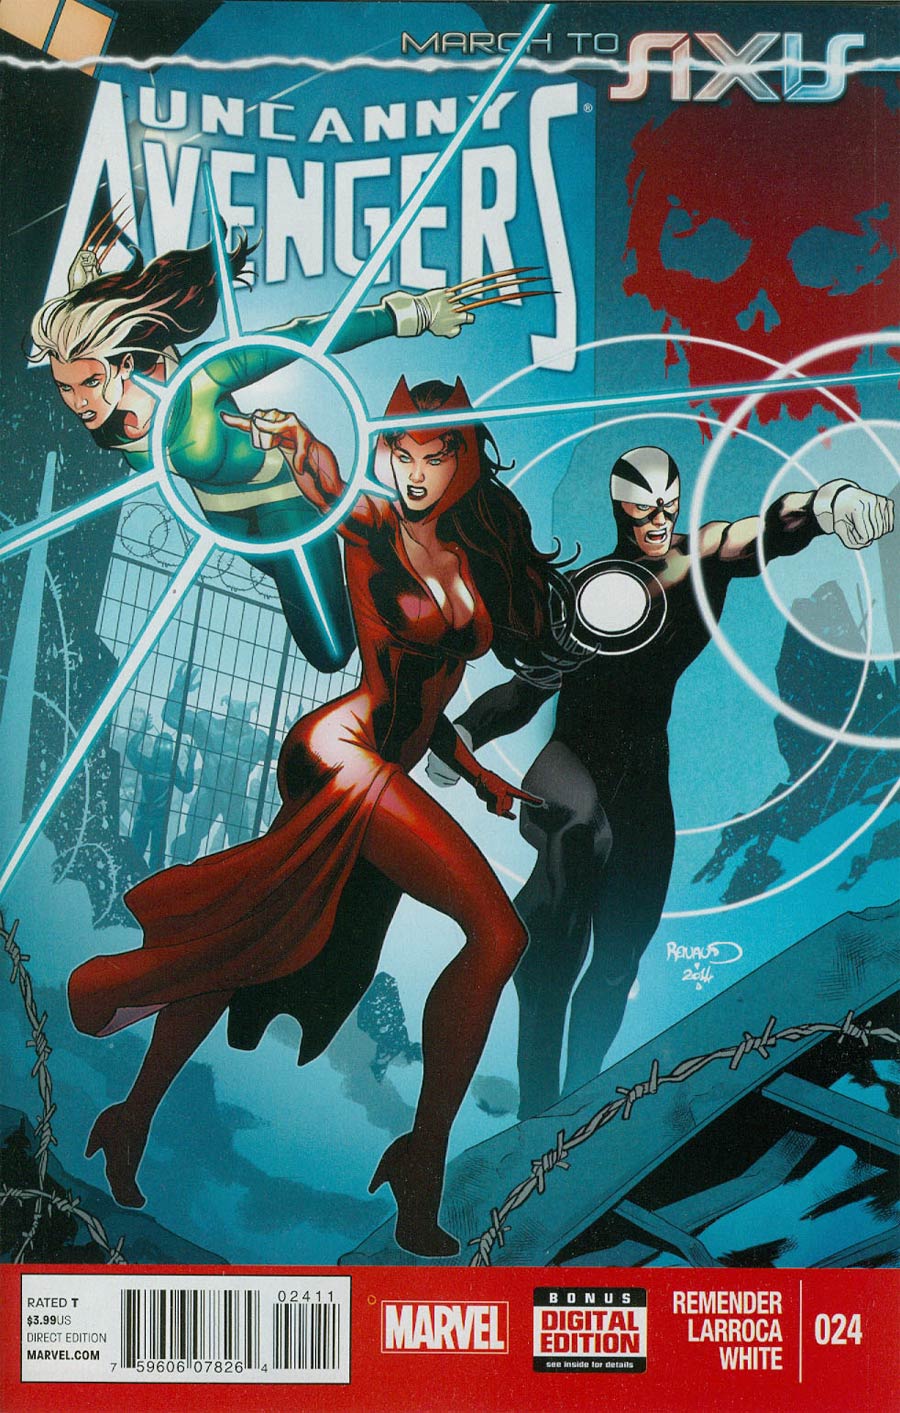 Uncanny Avengers #24 (March To AXIS Tie-In)